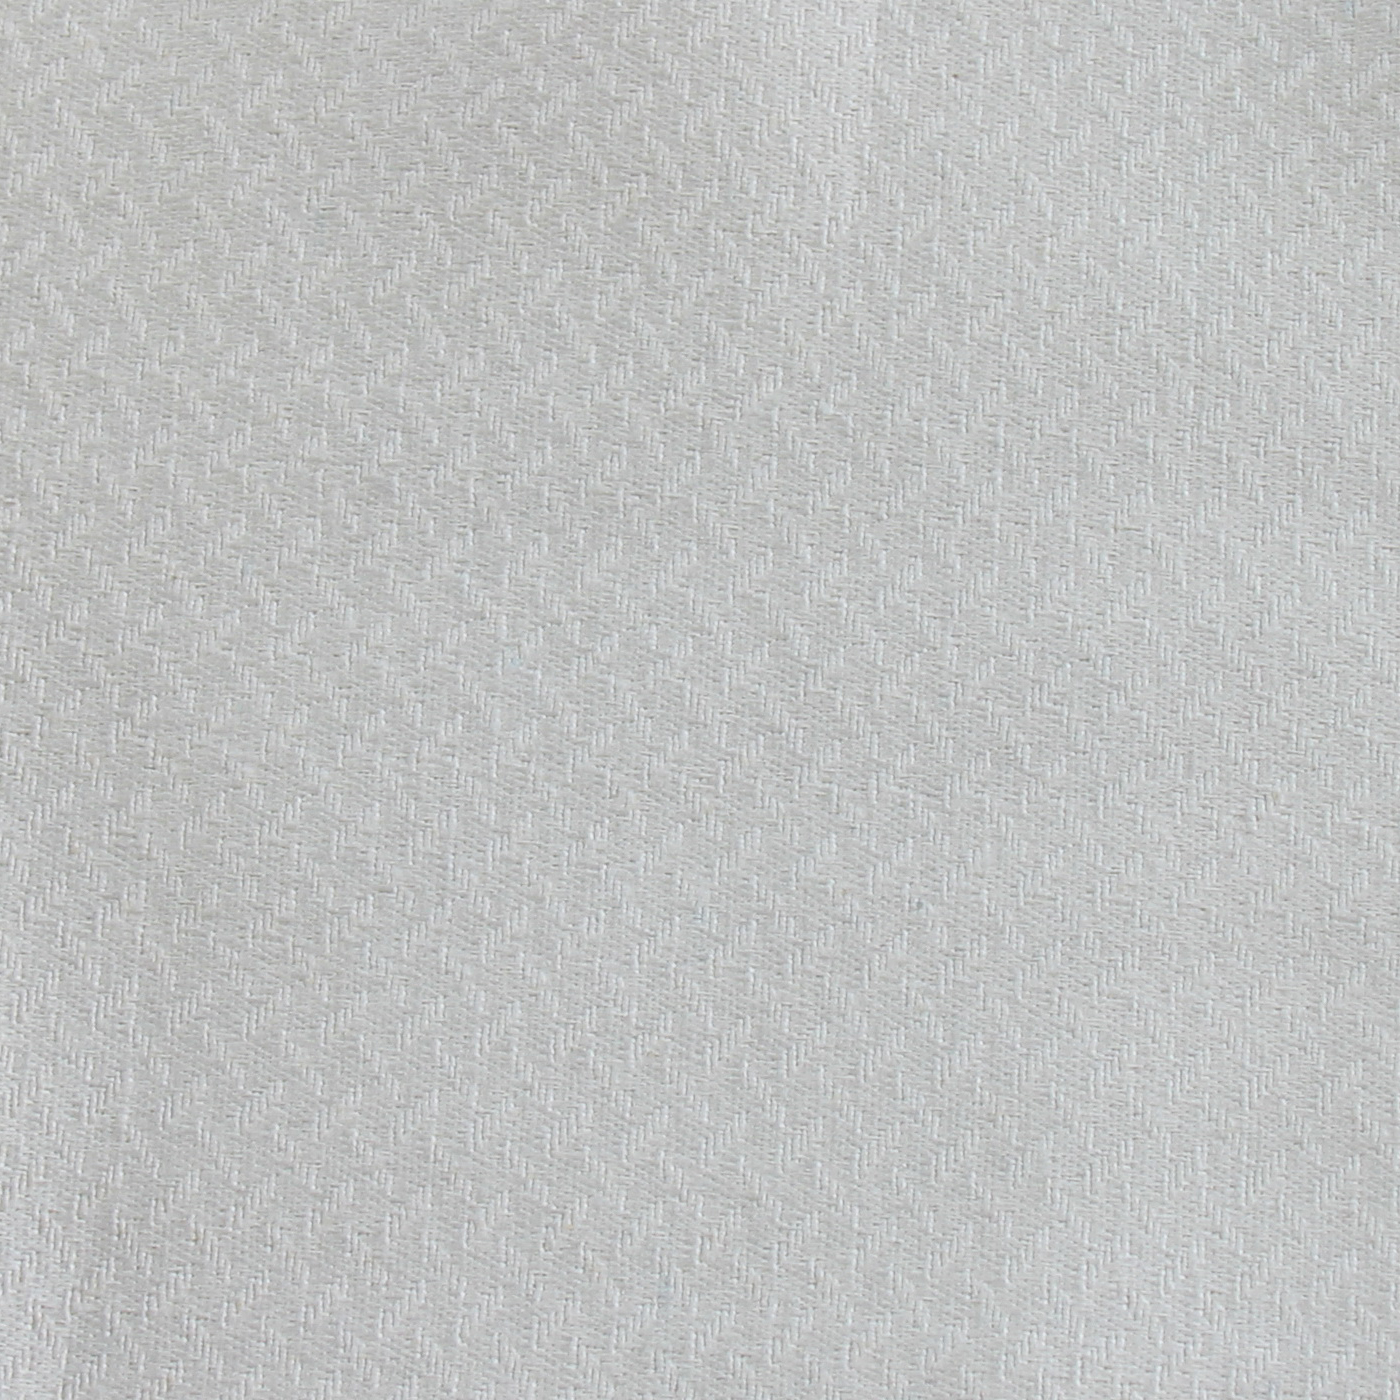 NO 28-45 RS X1 NO 18 Fabric Upholstery Sample